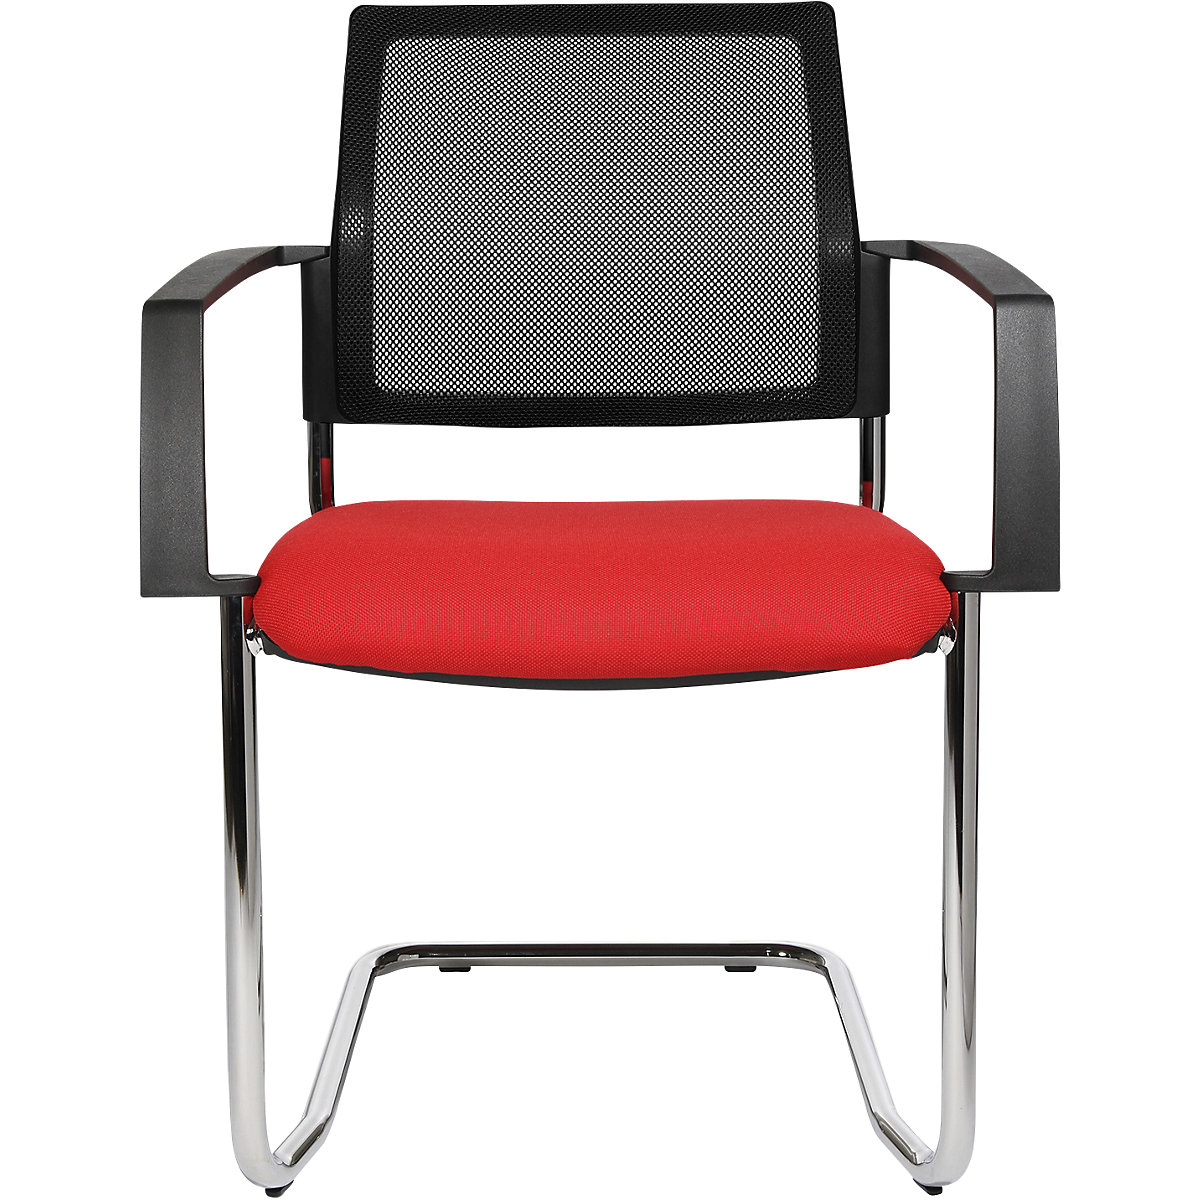 Mesh stacking chair – Topstar, cantilever chair, pack of 2, red seat, chrome frame-6